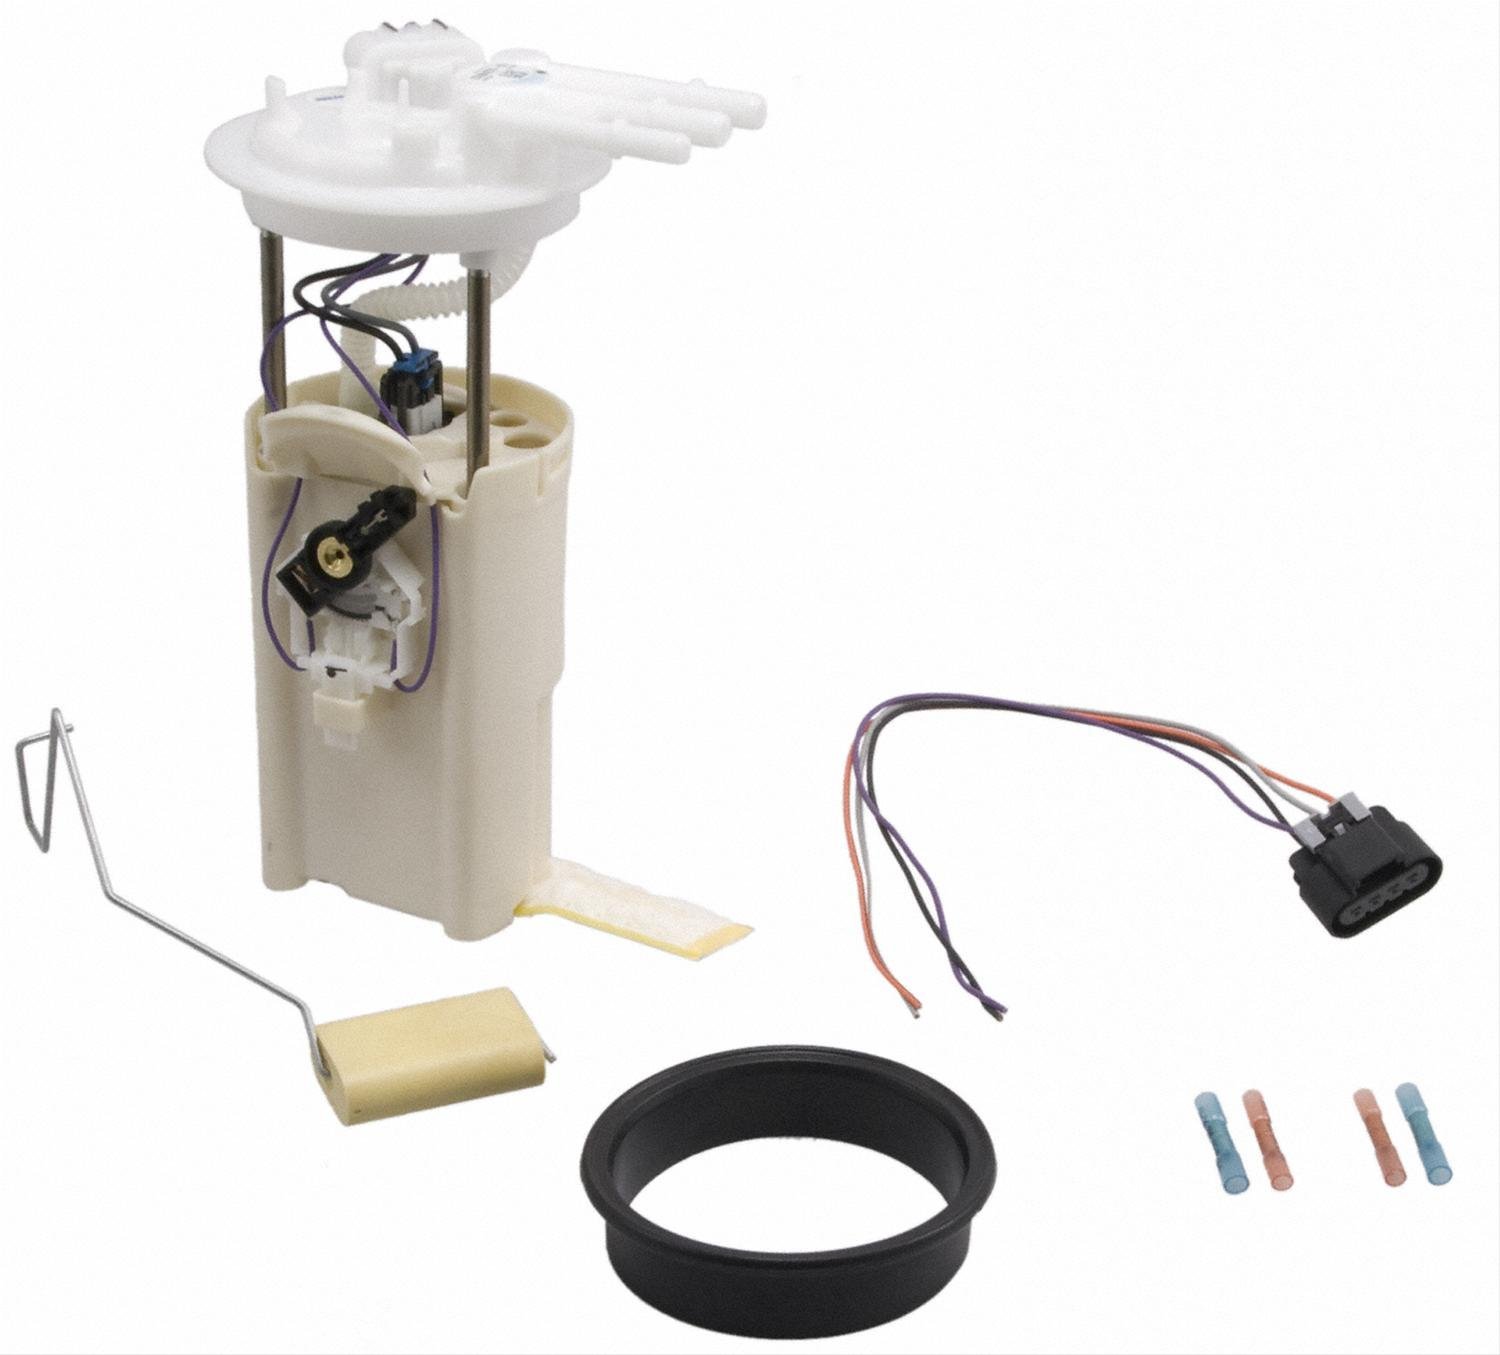 OE GM Replacement Electric Fuel Pump Module Assembly 2000-01 Chevrolet Suburban 2500 6.0L/8.1L V8